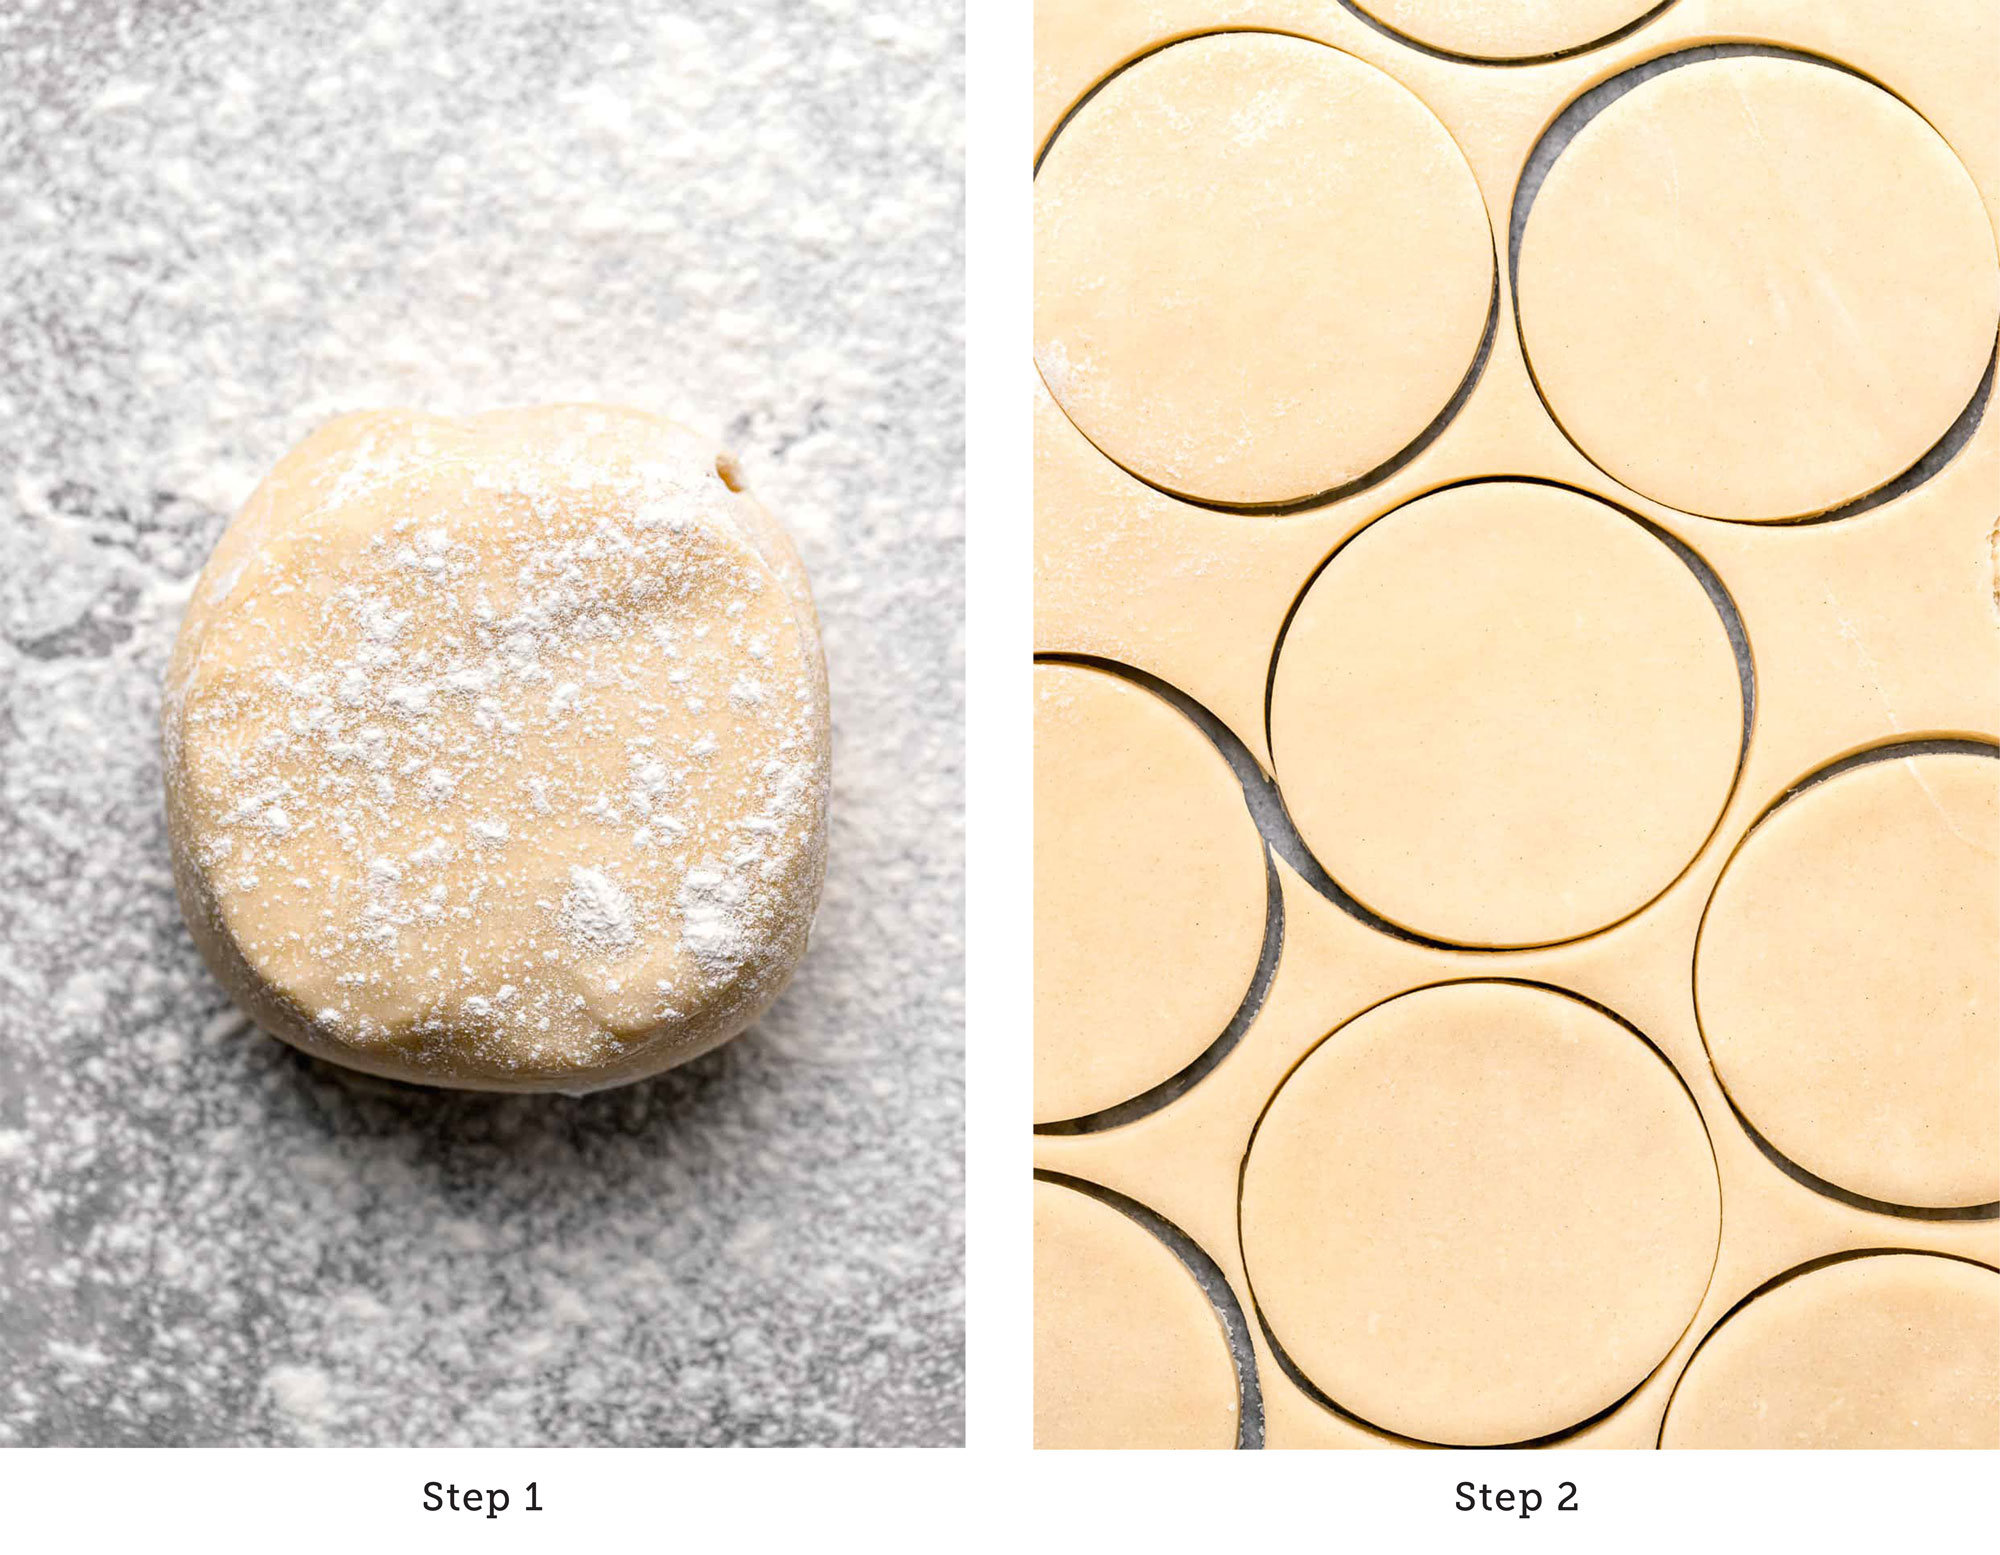 side by side image of the unrolled pie dough on the left side and a caption beneath reading Step 1 and an image of the rolled out pie dough on the right side with circles cut out of it and a caption beneath that reads Step 2